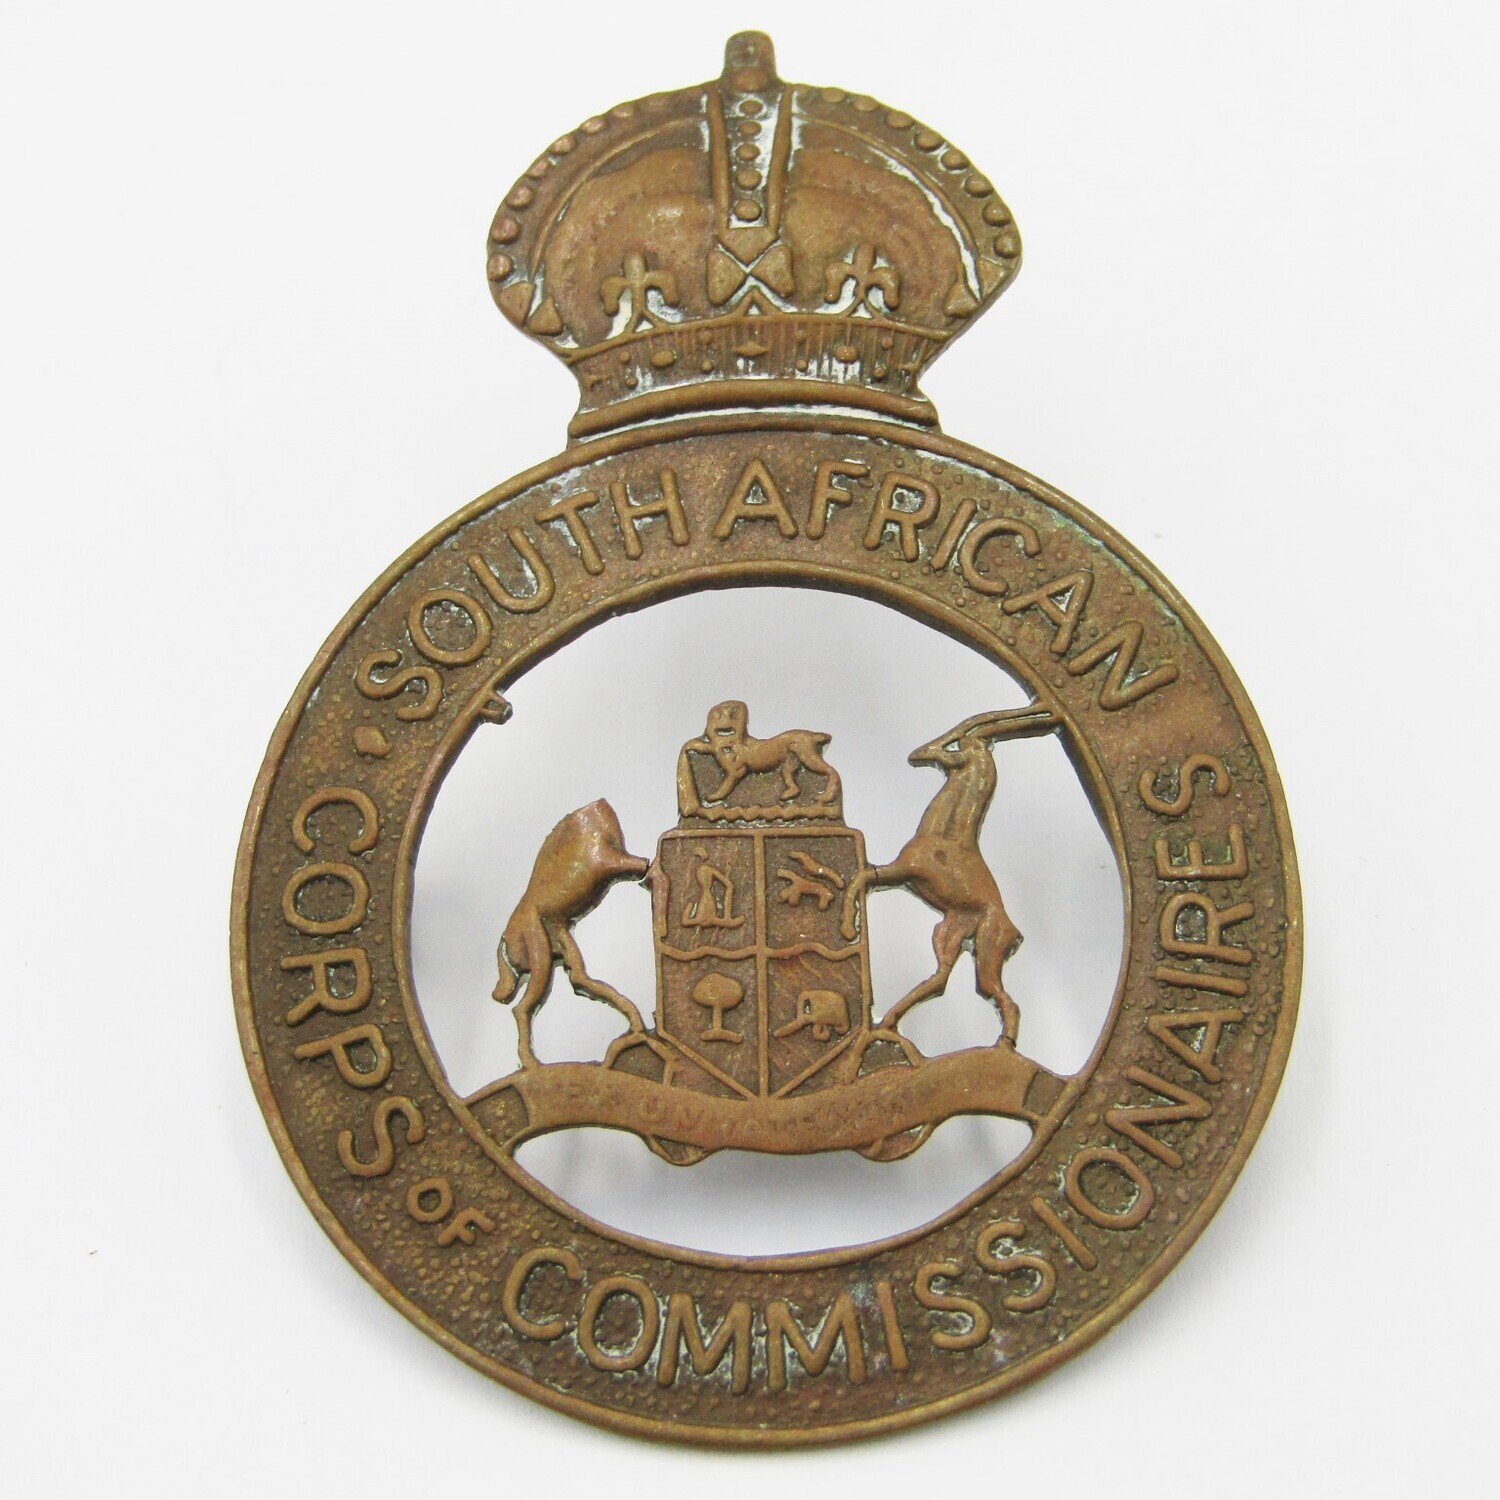 South African Corps of Commissionaires badge